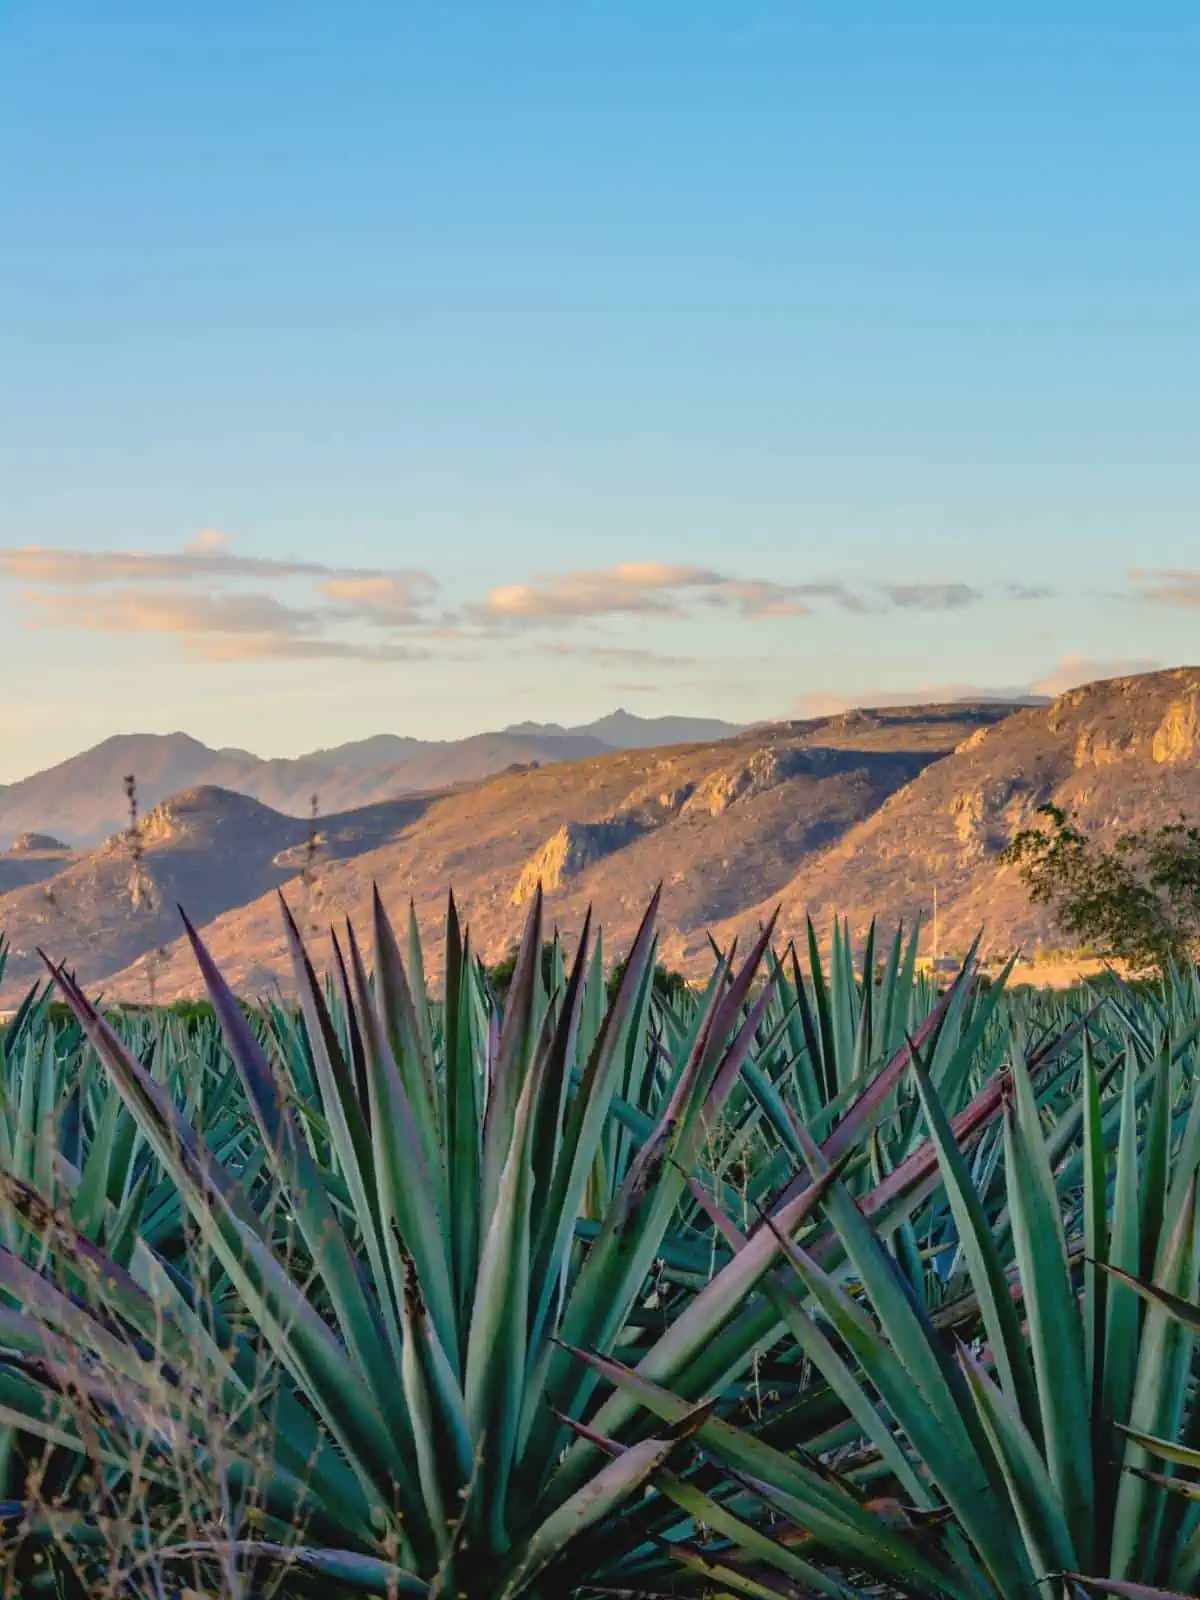 A field of blue agave plants in front of mountains.